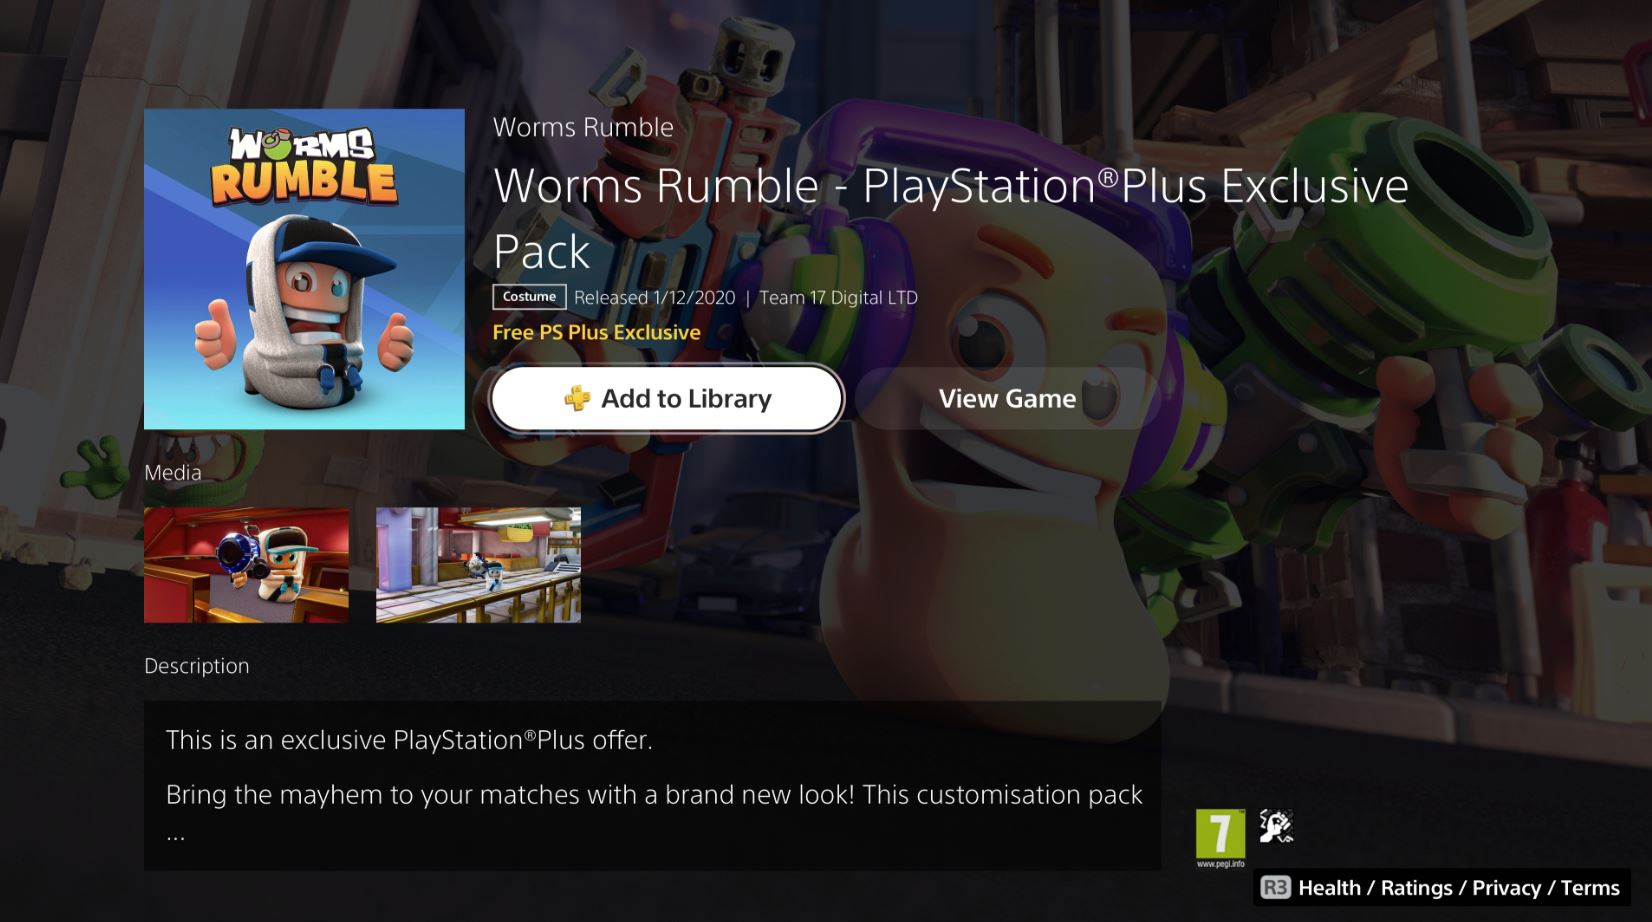 Worms Rumble PS Plus Exclusive Pack And Costume For PS5 And PS4 Available  Now On The PlayStation Store - PlayStation Universe